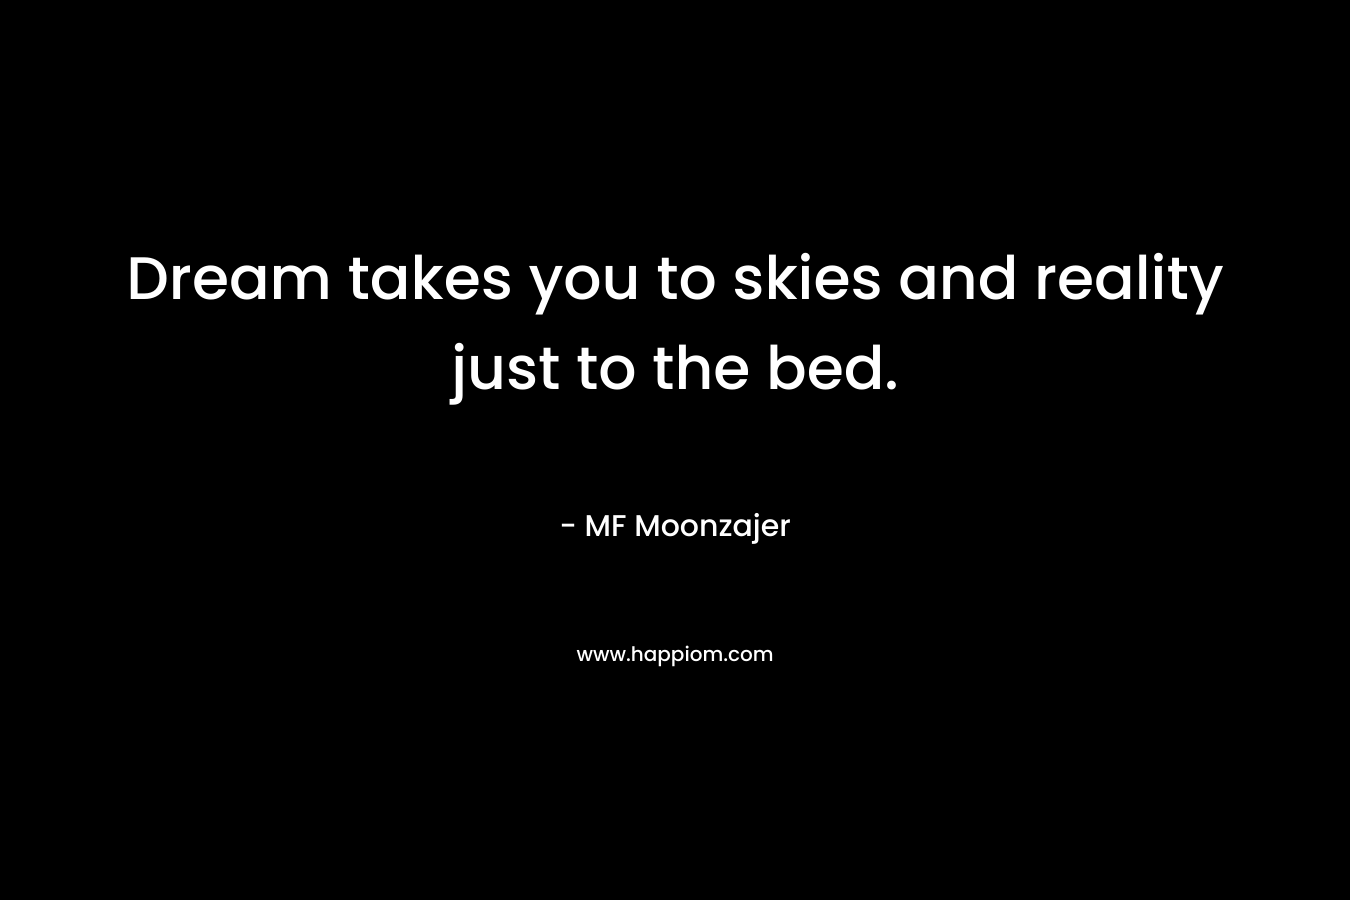 Dream takes you to skies and reality just to the bed. – MF Moonzajer